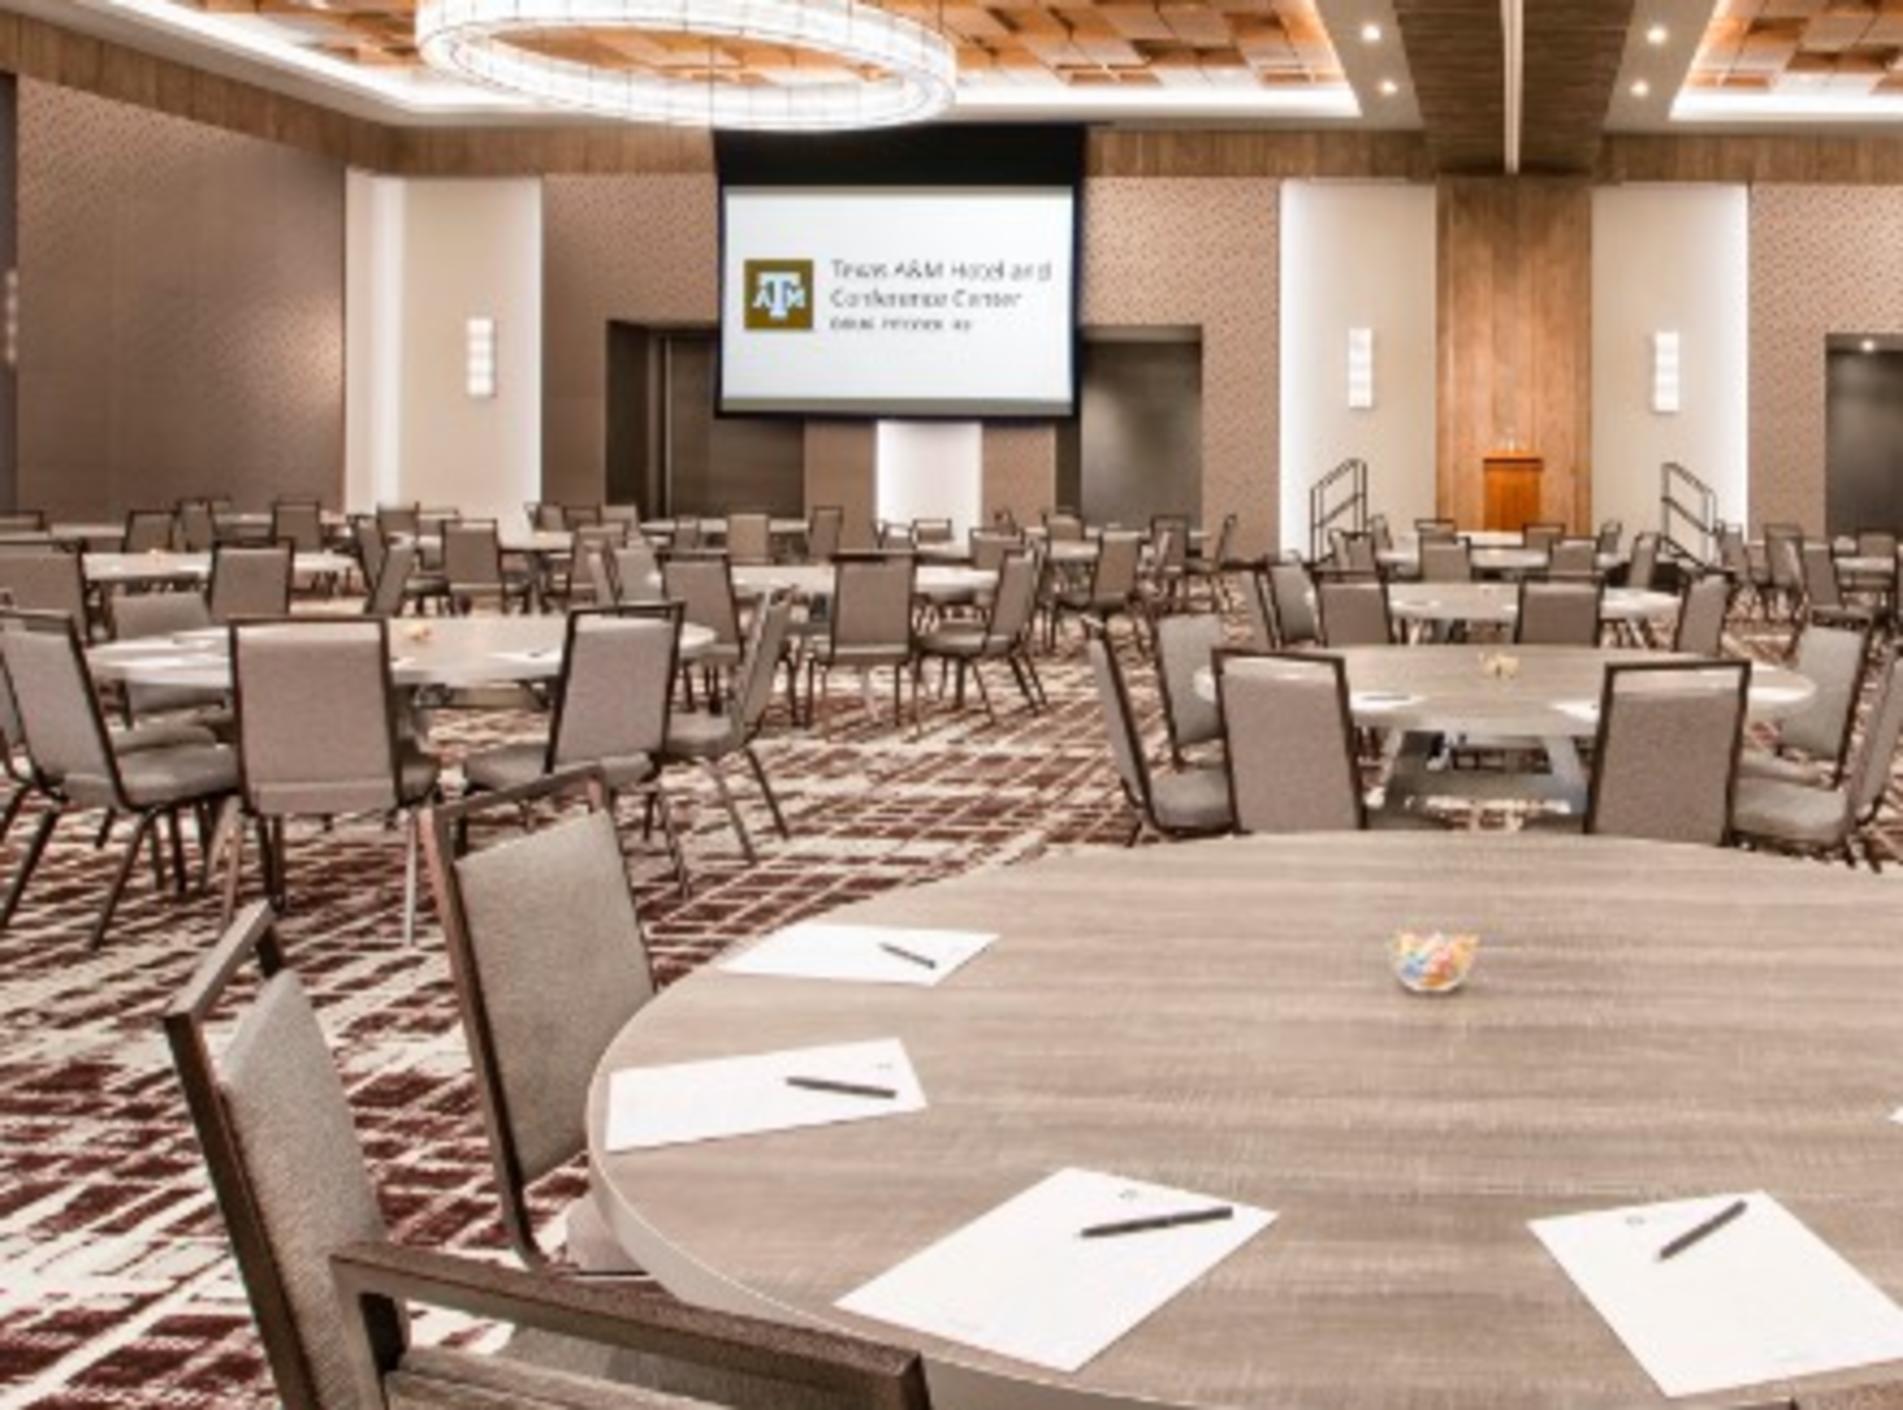 Texas A&M Hotel and Conference Center Meeting Room